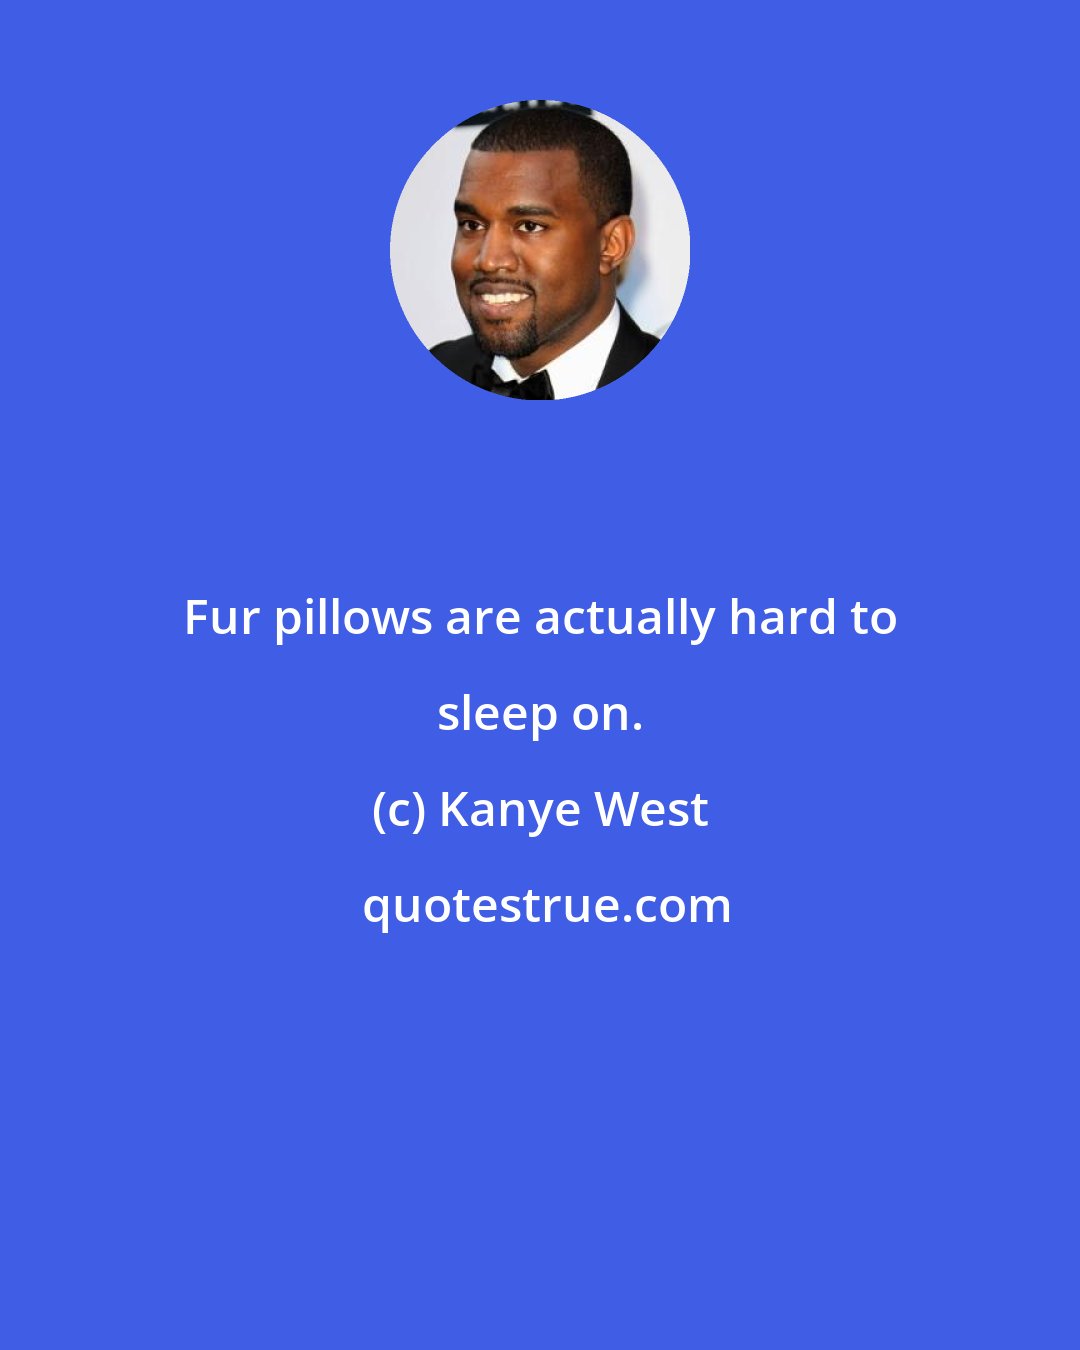 Kanye West: Fur pillows are actually hard to sleep on.